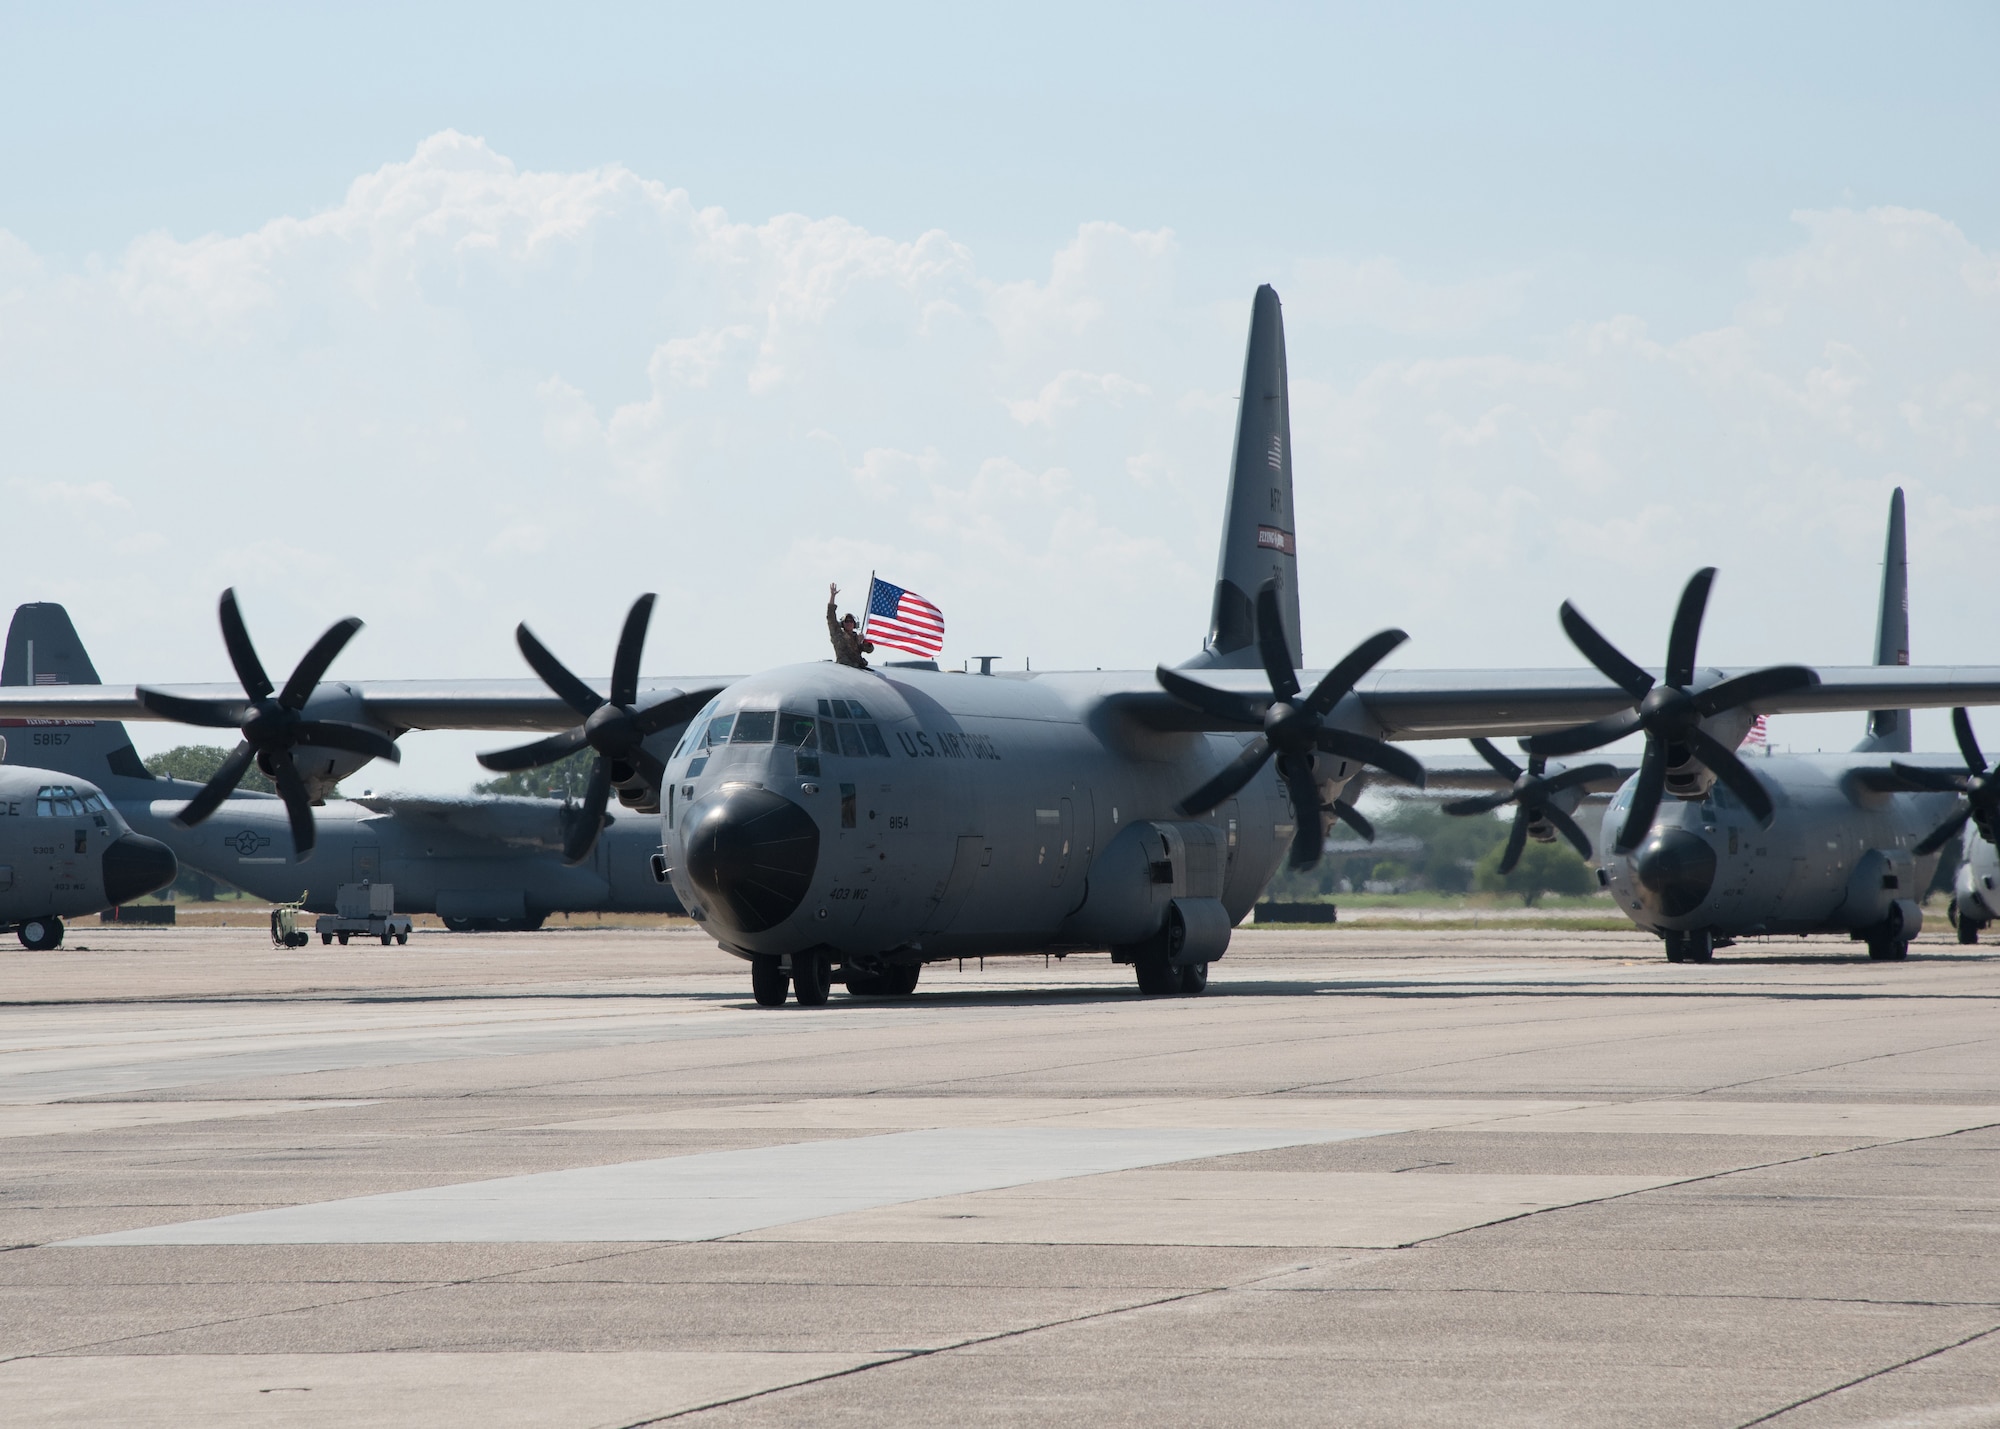 Air Force reservists with the 403rd Wing, Keesler Air Force Base, Mississippi, and C-130J Super Hercules flown by the wing's 815th Airlift Squadron returned this weekend from their deployment to Southwest Asia in support of Operations Freedom Sentinel and Inherent Resolve. (U.S. Air Force photo/Maj. Marnee A.C. Losurdo)